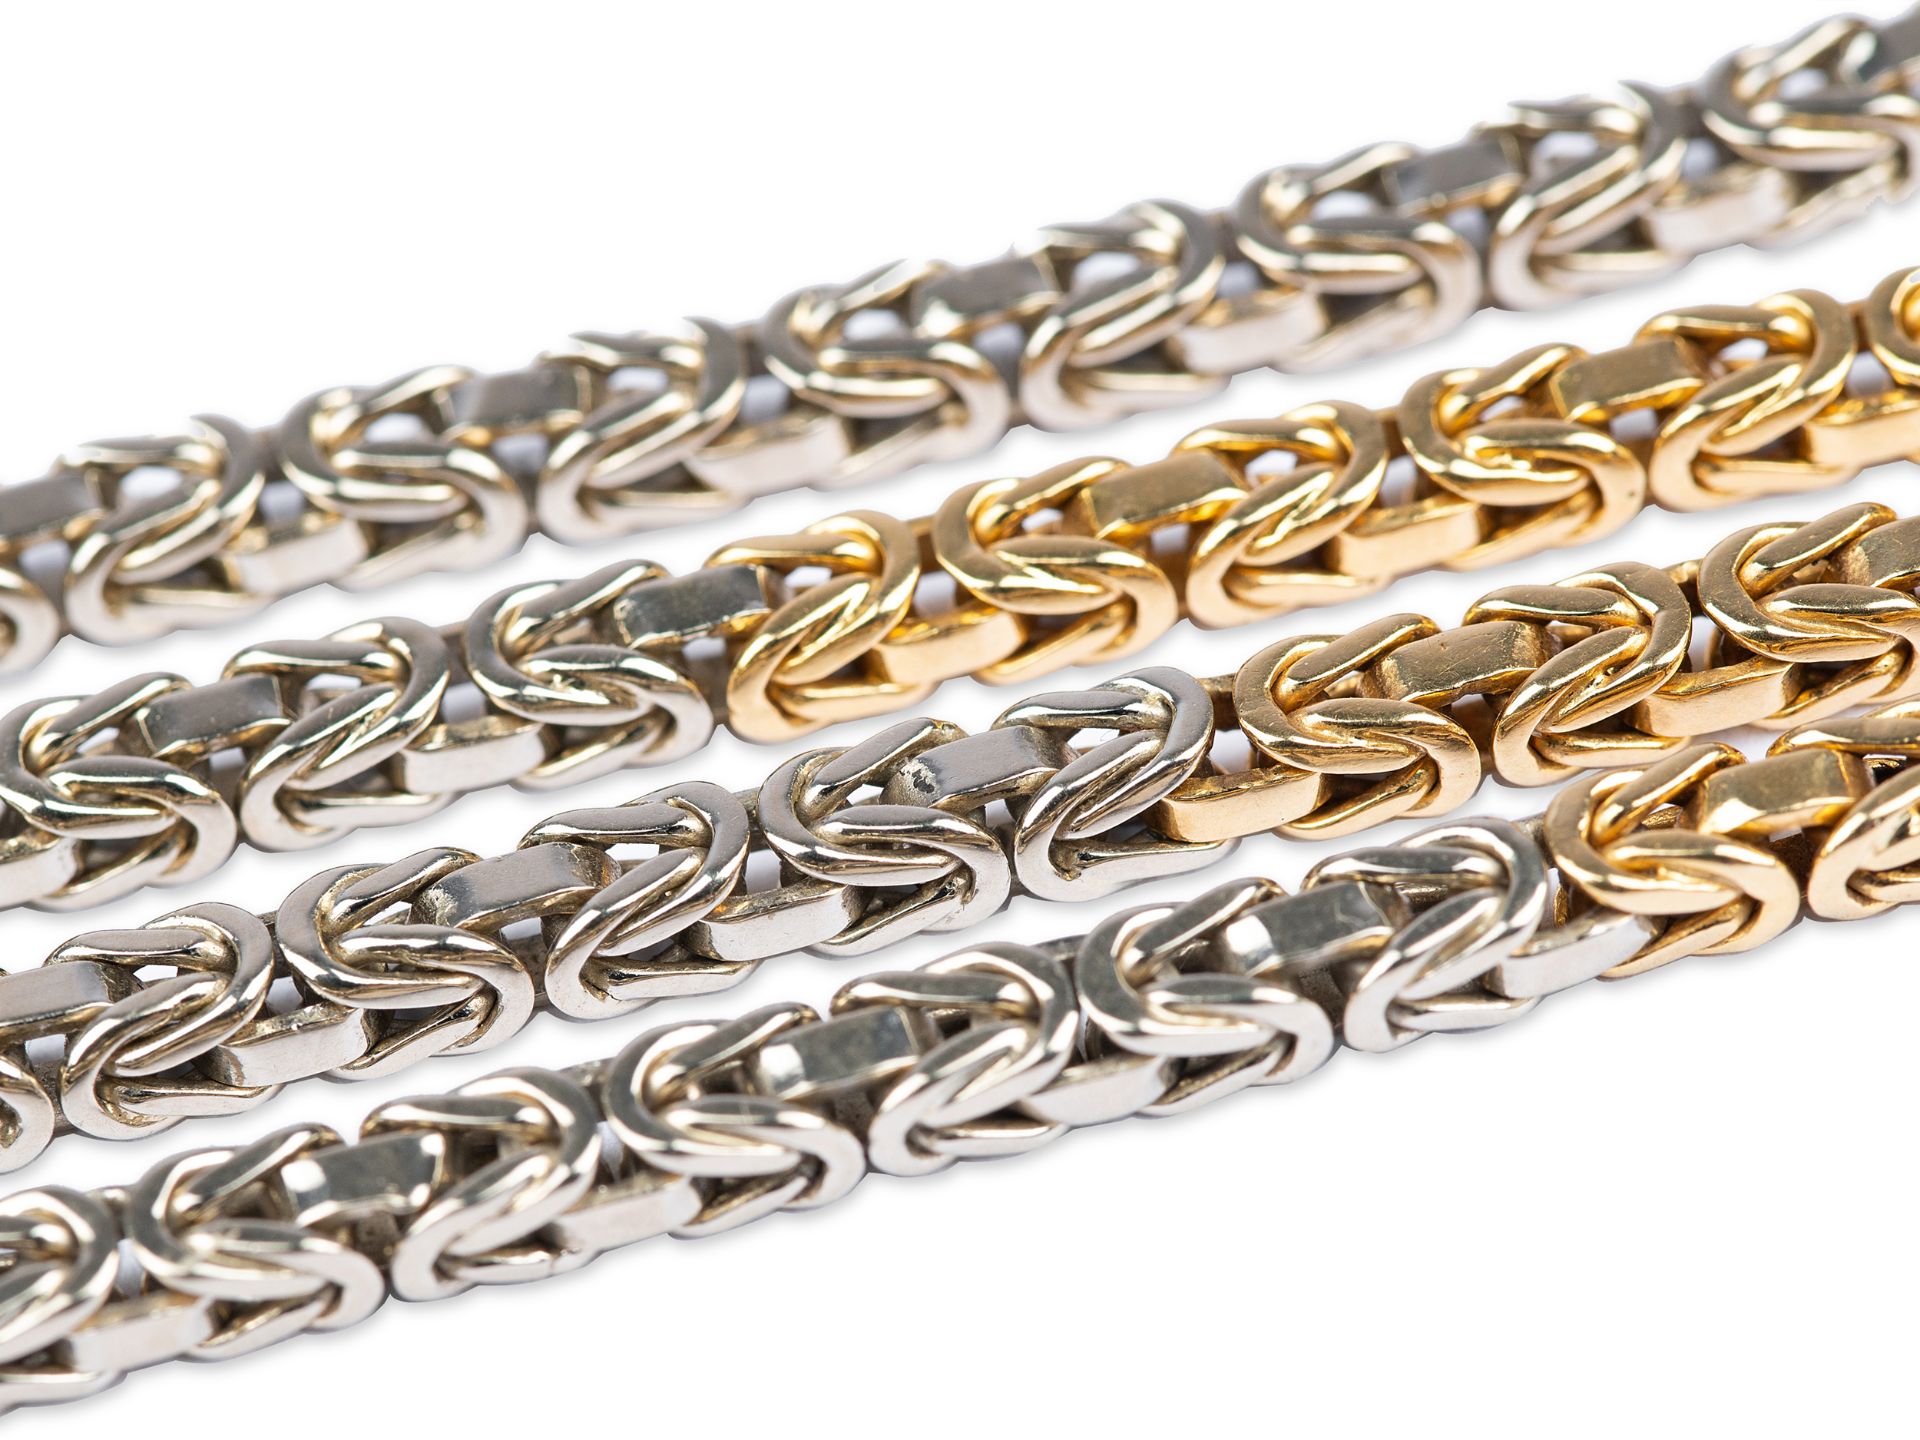 King necklace bicolour, 18kt yellow & white gold - Image 3 of 4